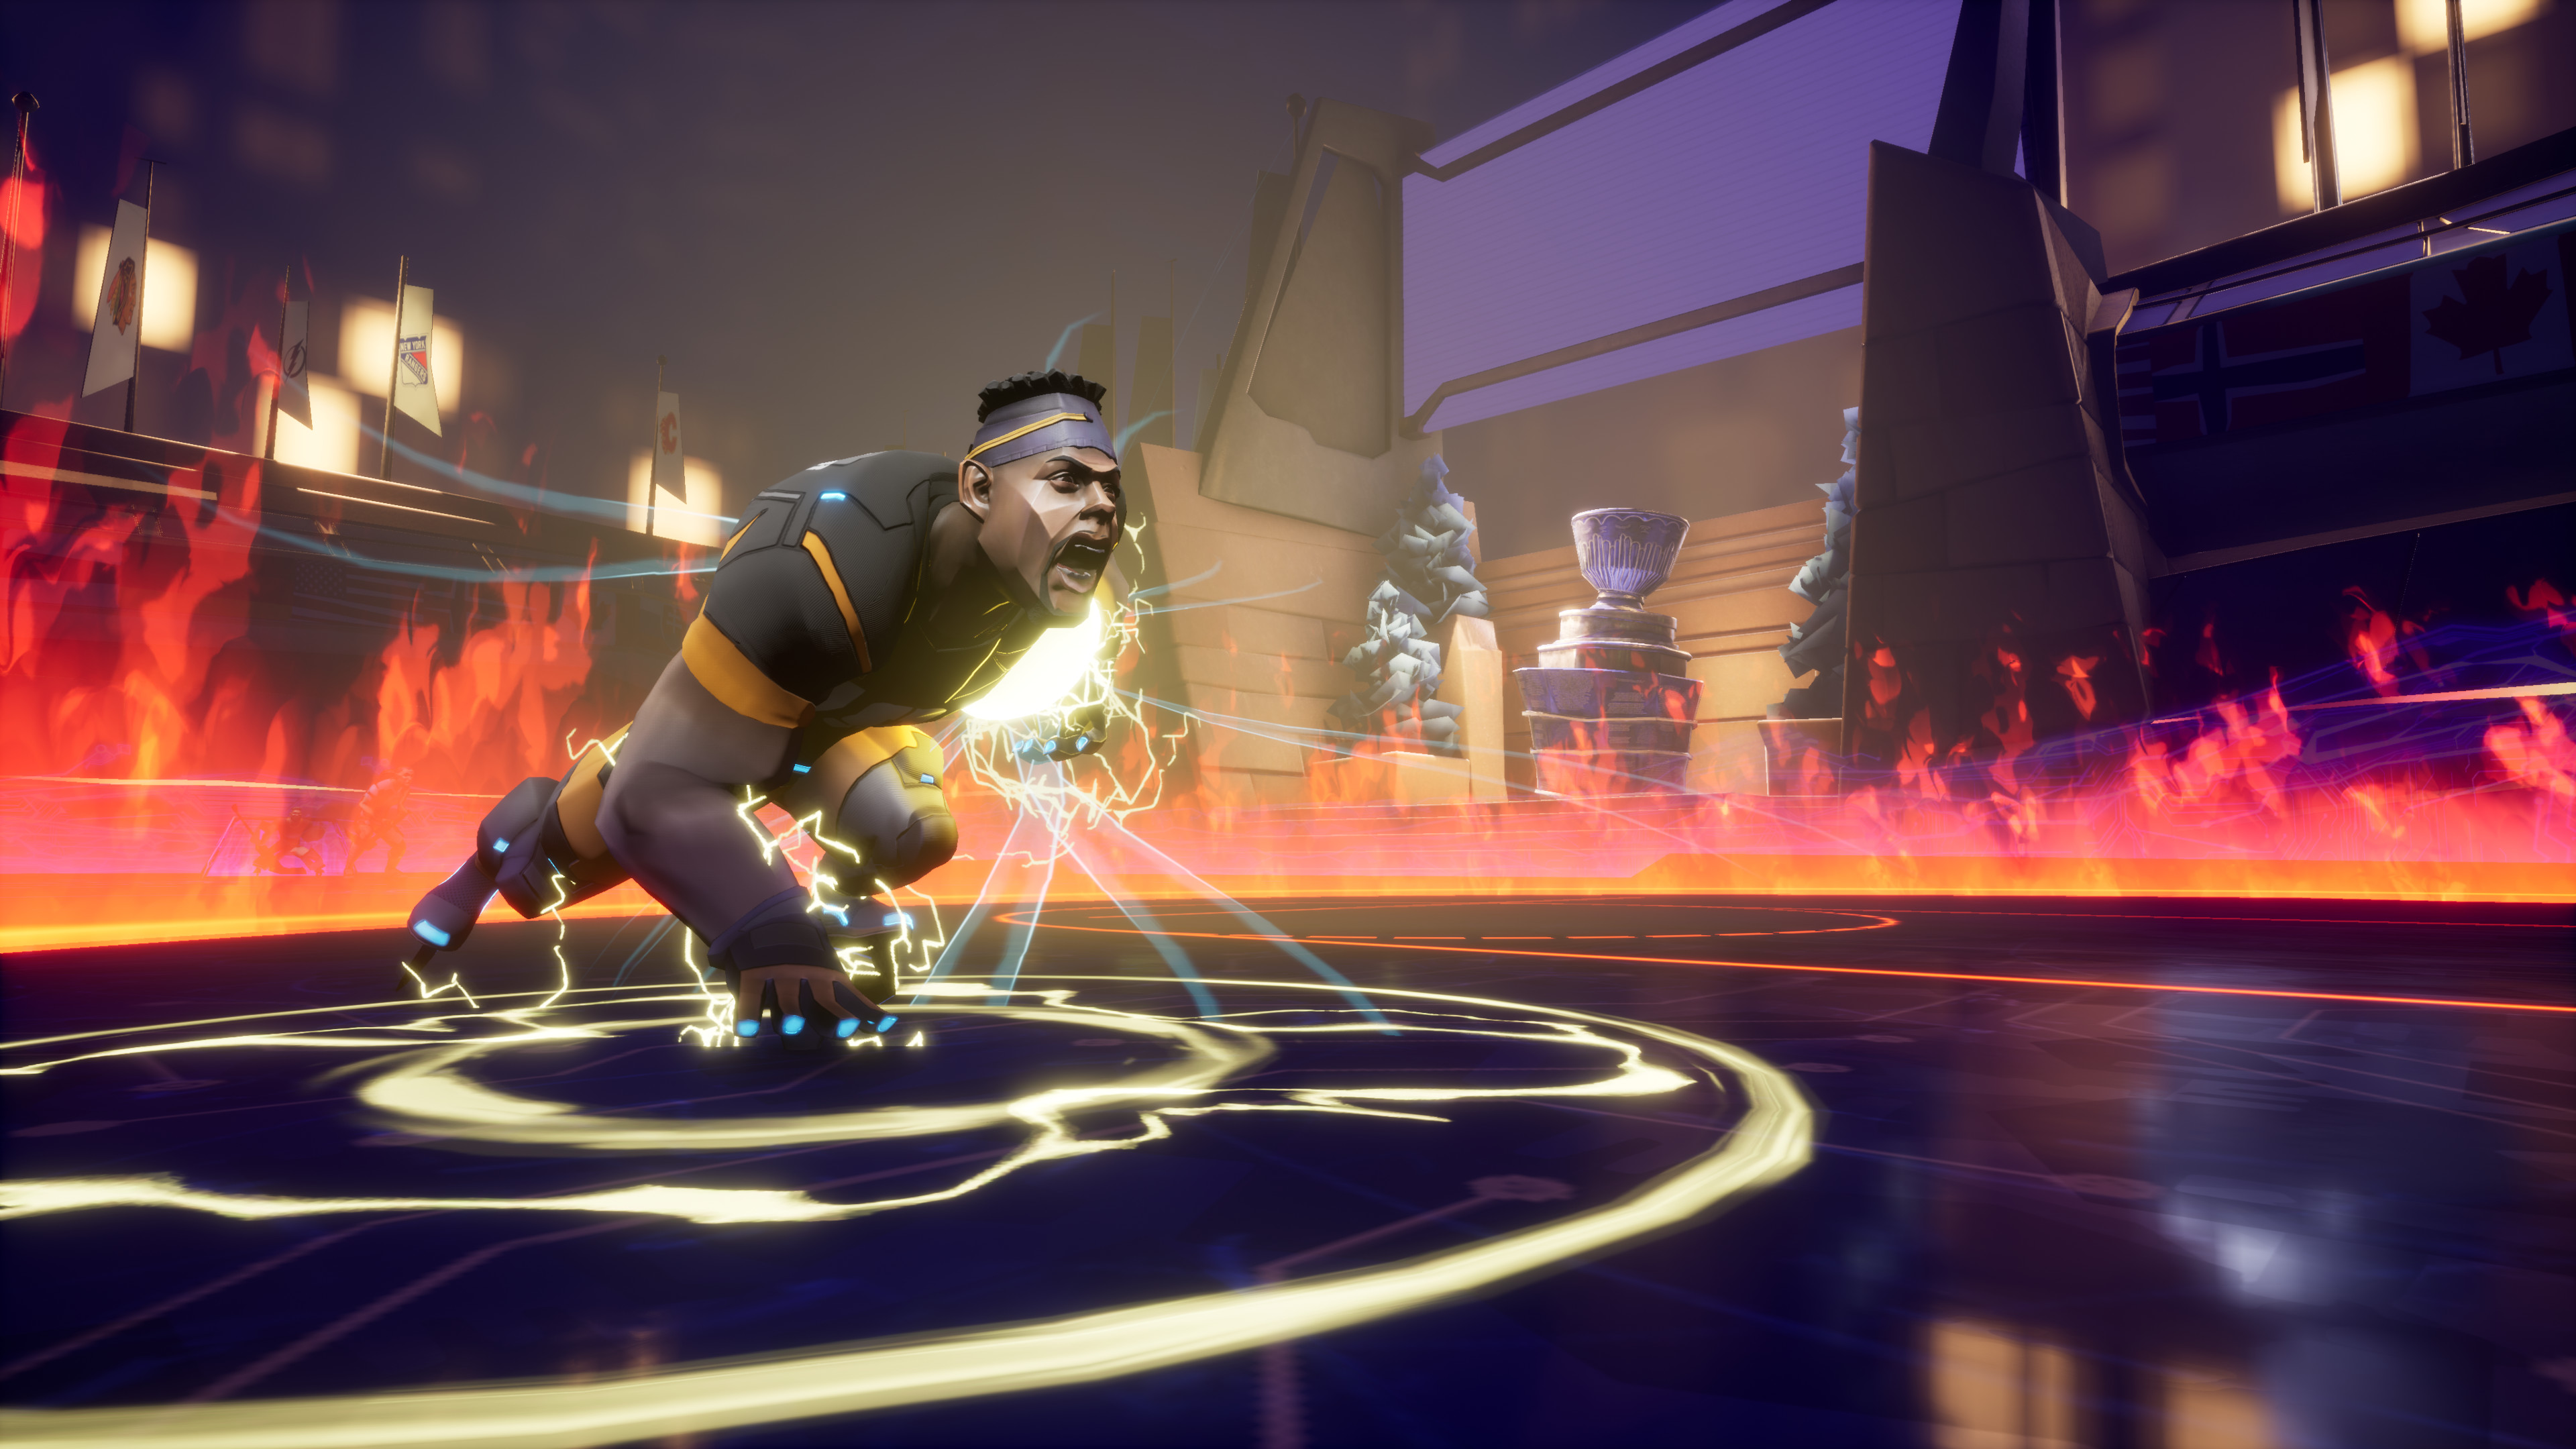 Ultimate Rivals: The Rink screenshot